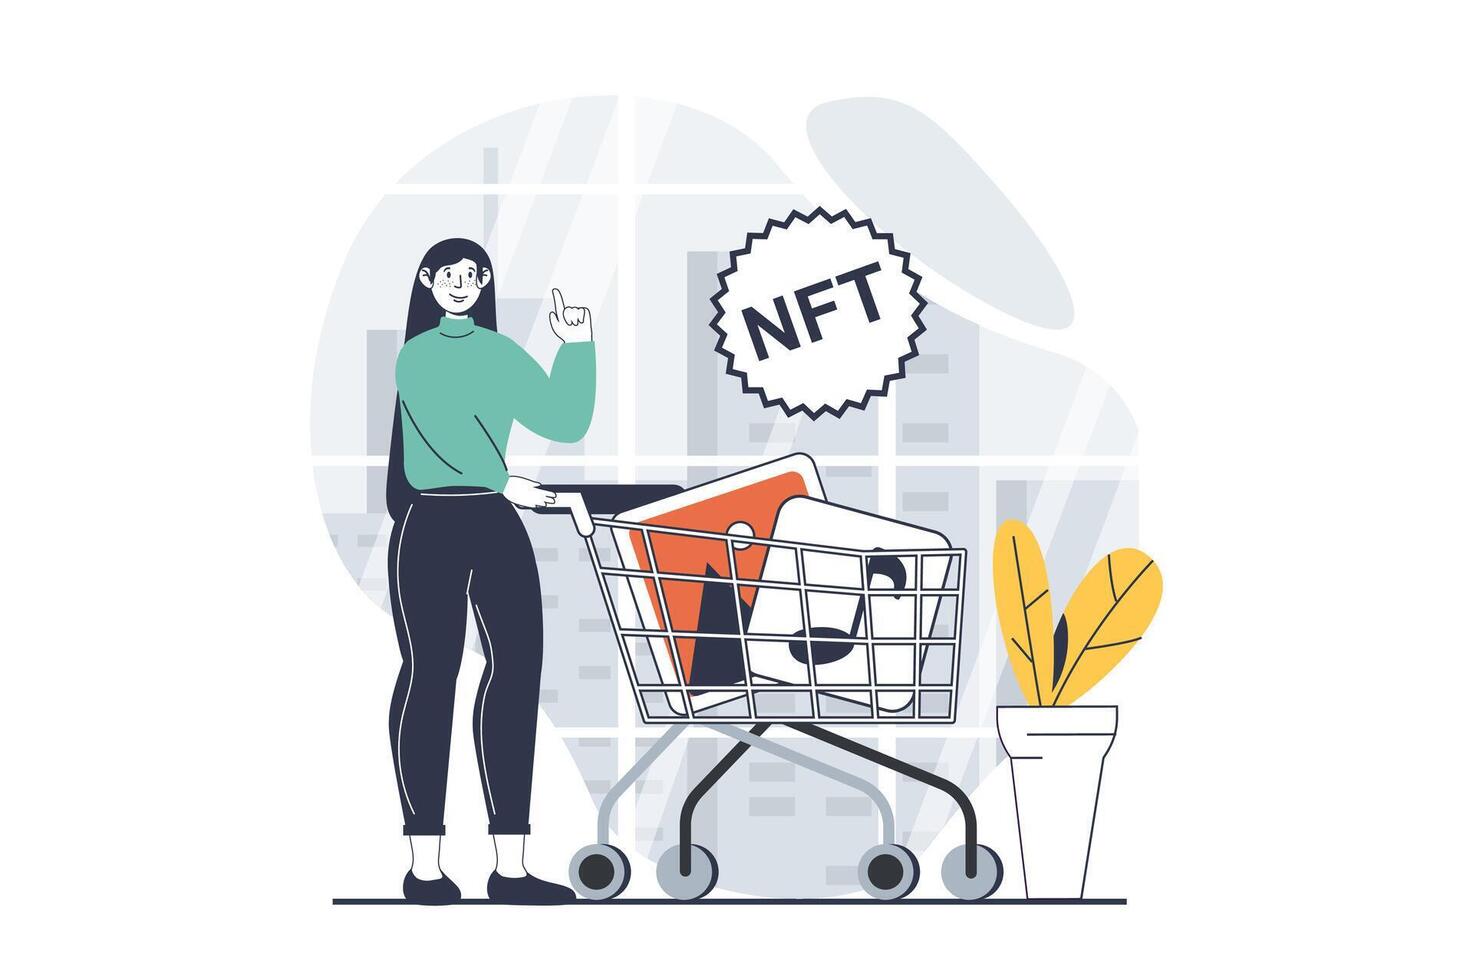 NFT token concept with people scene in flat design for web. Woman with cart buying collectible artwork paintings in virtual gallery. Vector illustration for social media banner, marketing material.